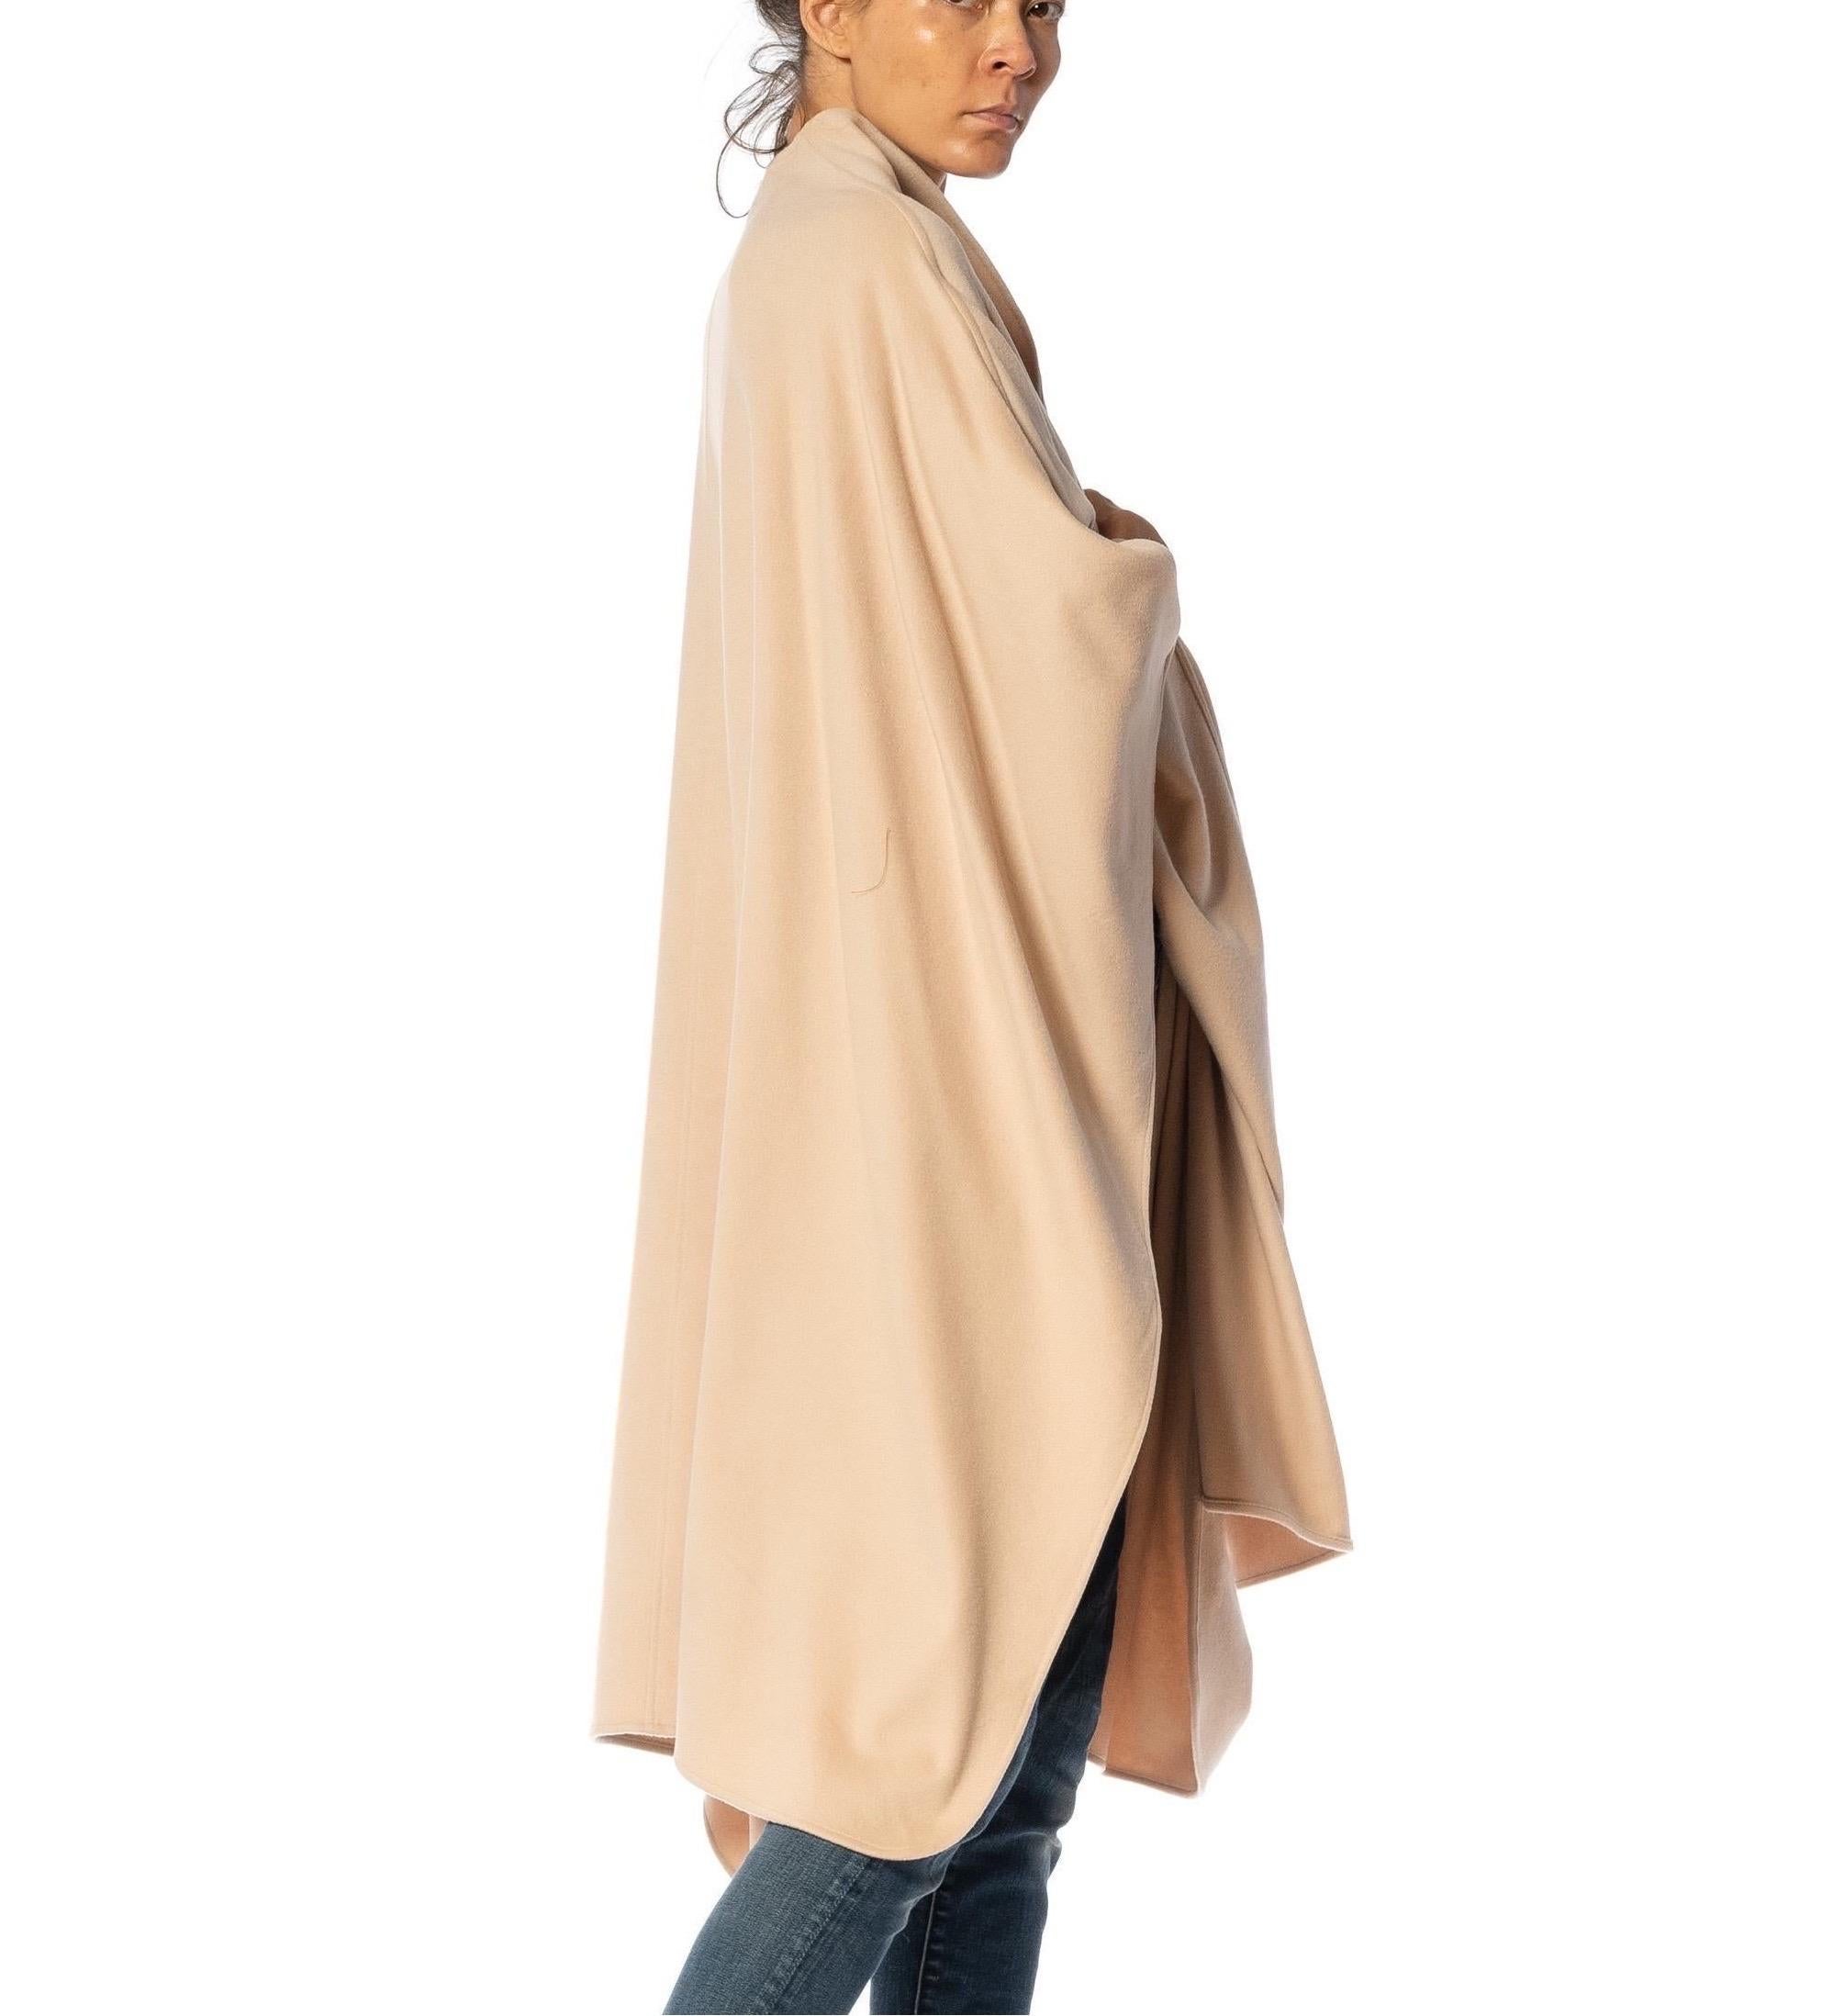 2000S GENNY Beige Cashmere Shawl For Sale 2